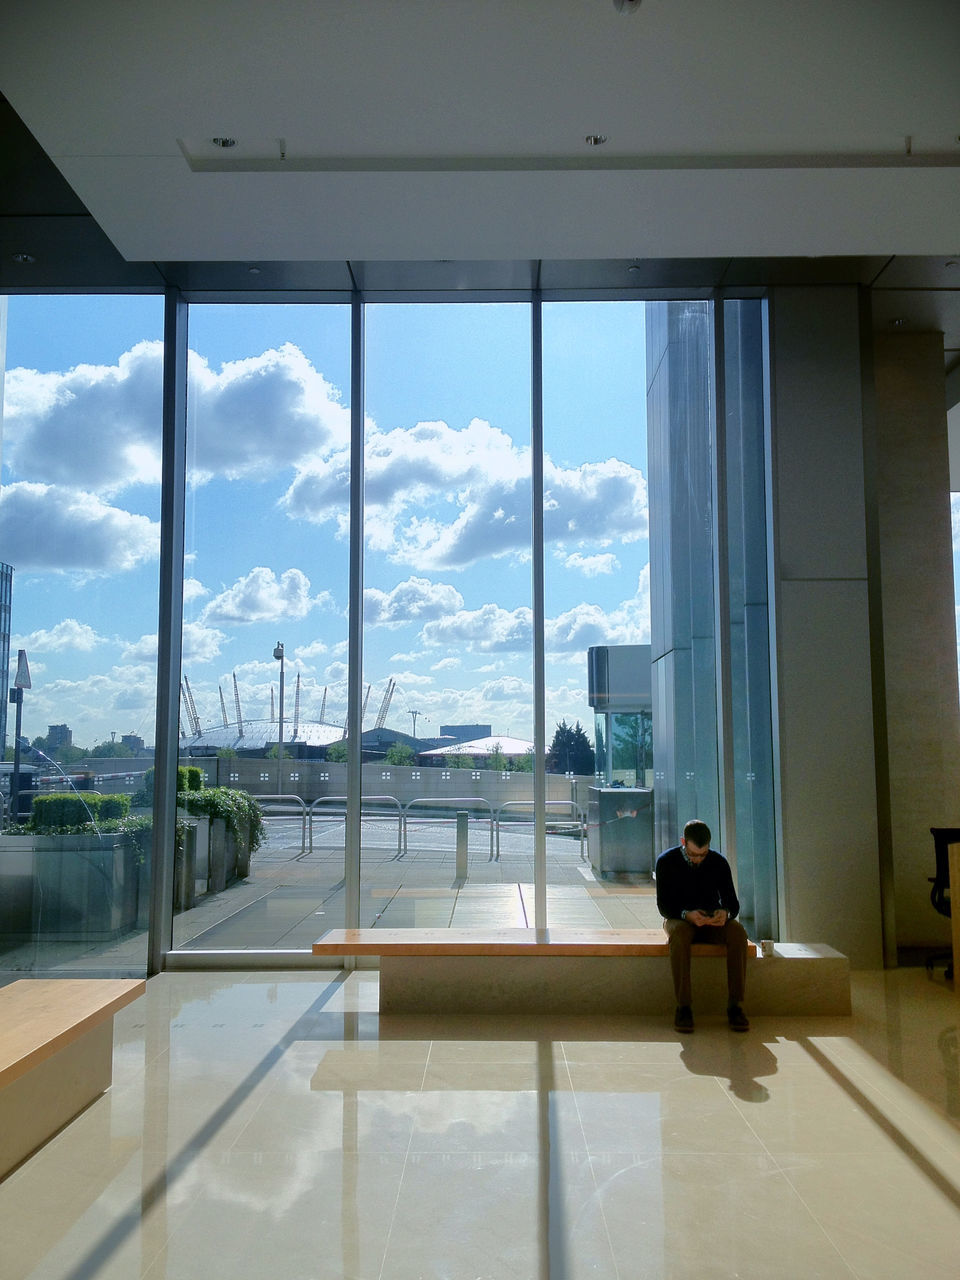 indoors, window, architecture, built structure, glass - material, transparent, sky, building exterior, city, day, looking through window, cloud - sky, cloud, glass, railing, table, cityscape, sunlight, chair